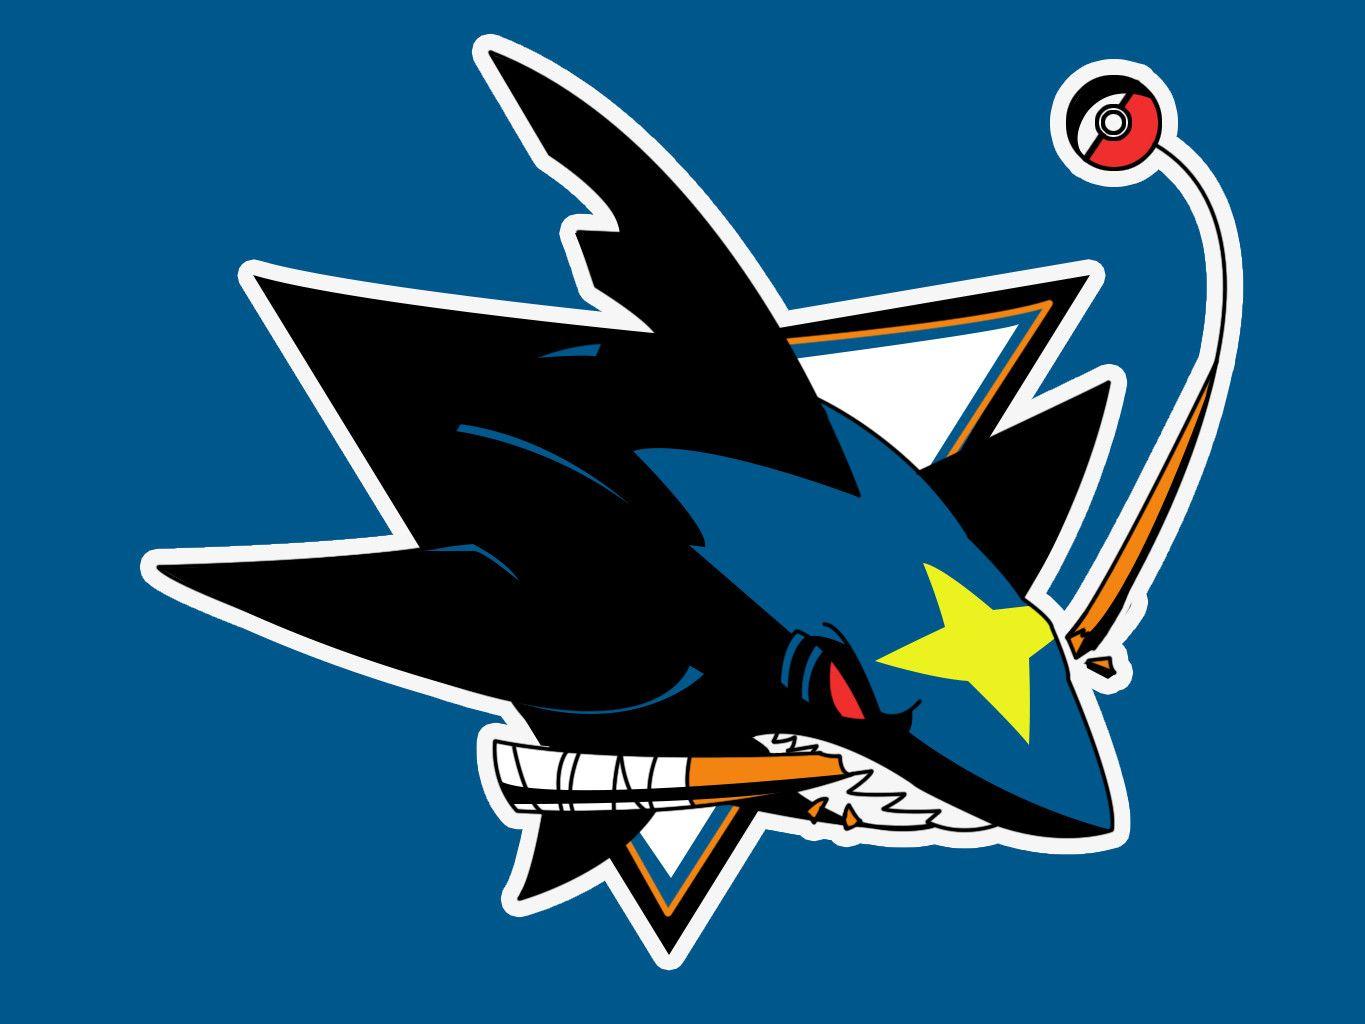 NHL Pokémon Logos: For All You Hockey Pokémon Fans Out There, Here